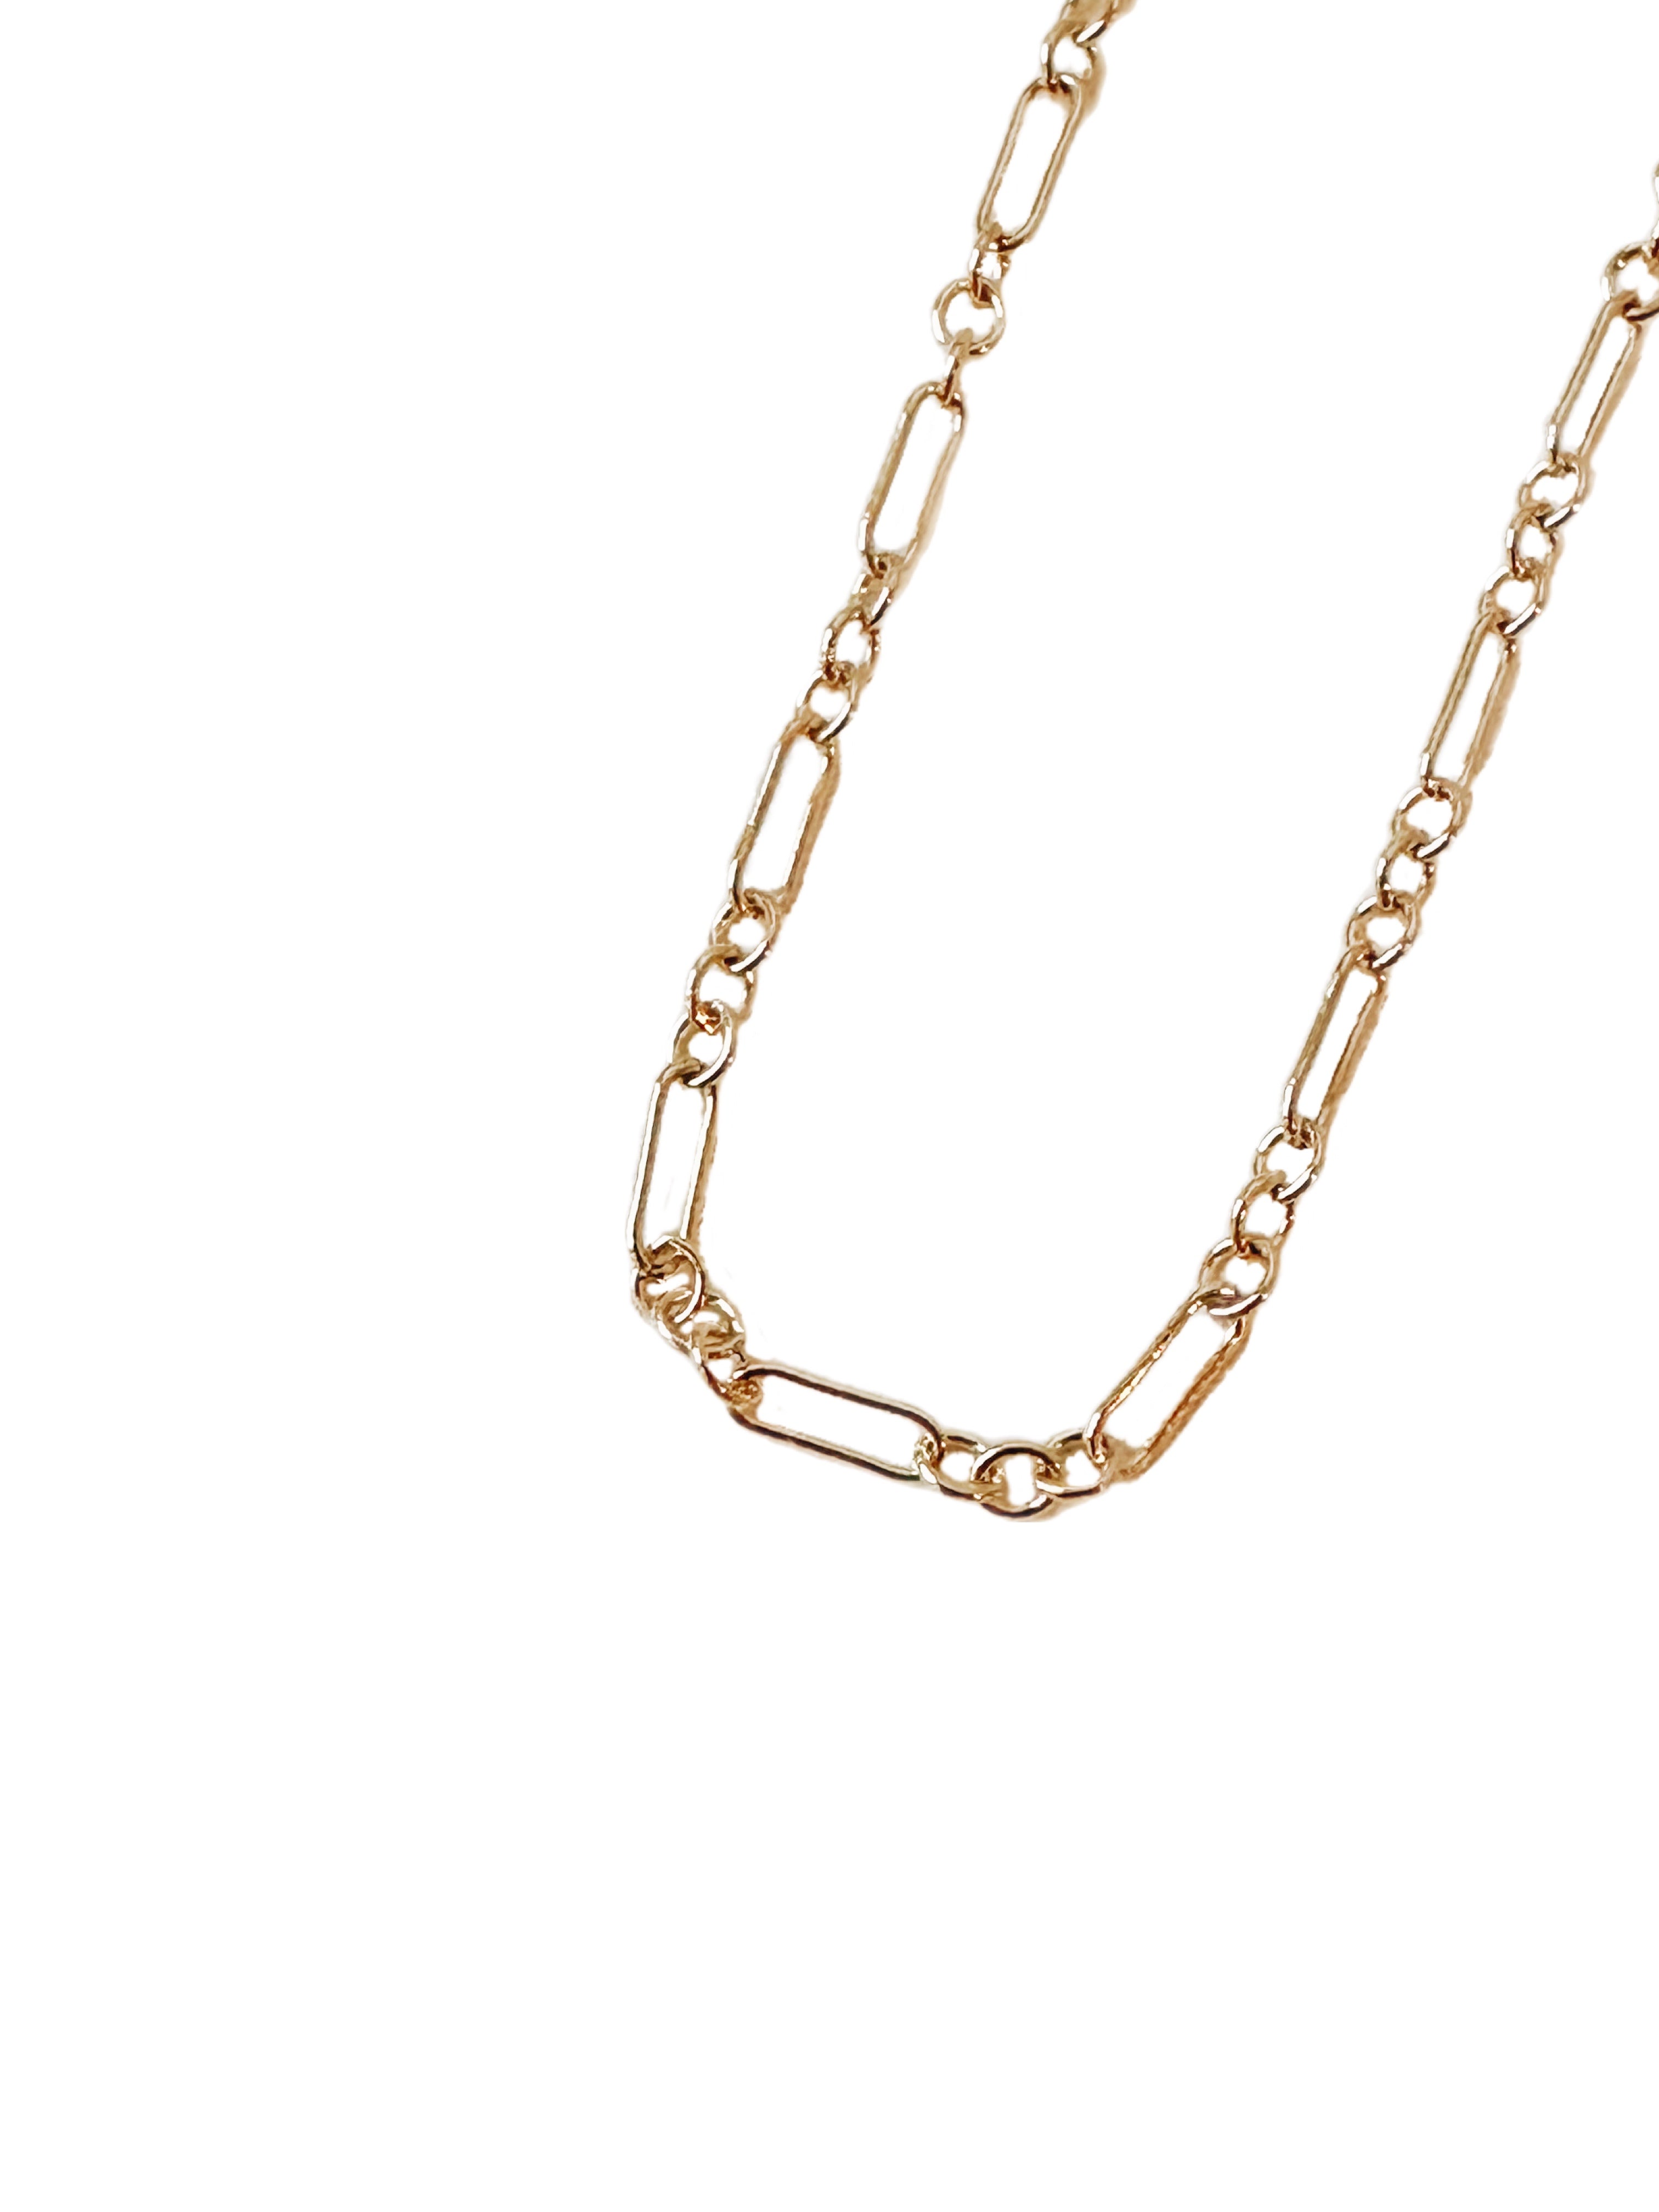 Naples - dainty gold-filled link necklace